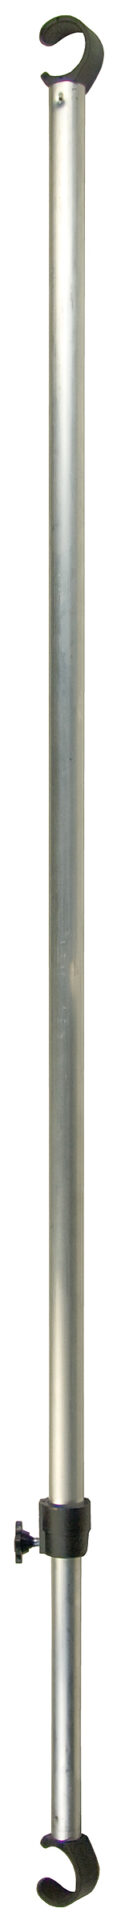 Otter Front Adjustable Wind Pole for Ice Fishing Hub